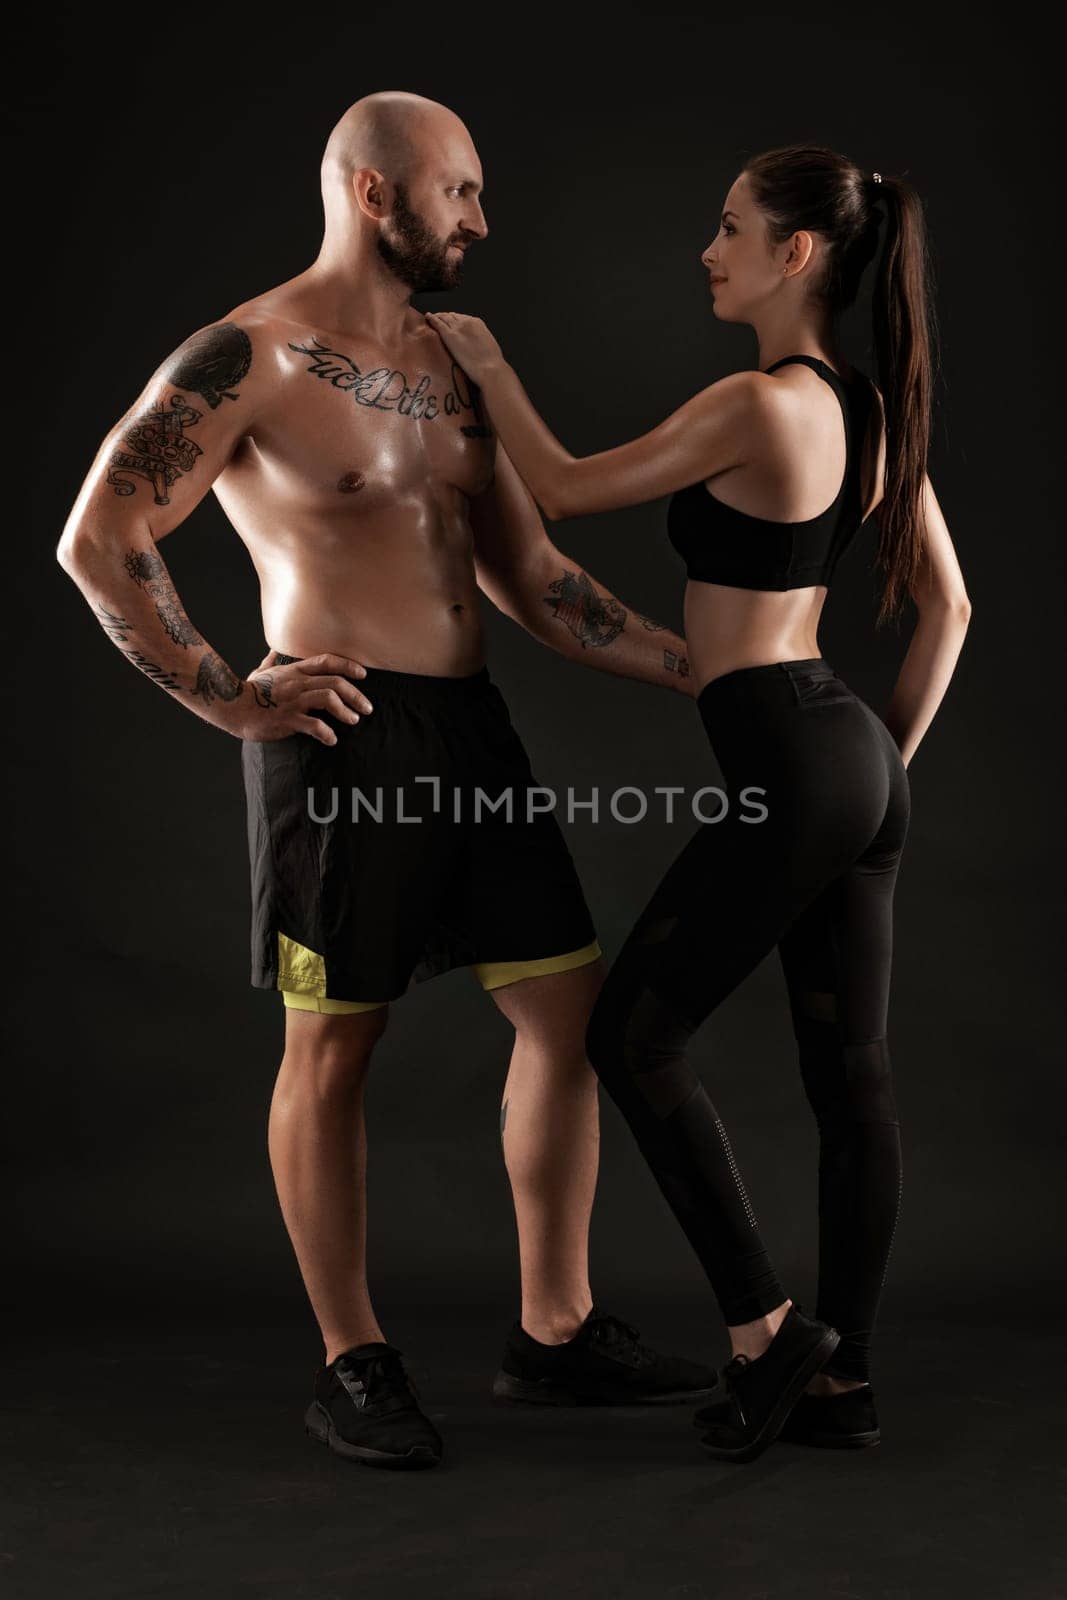 Strong bald, tattooed man in black shorts and sneakers with charming brunette woman in leggings and top are hugging standing sideways on black background and looking at each other. Fitness couple, chic muscular bodies, gym concept. The love story.